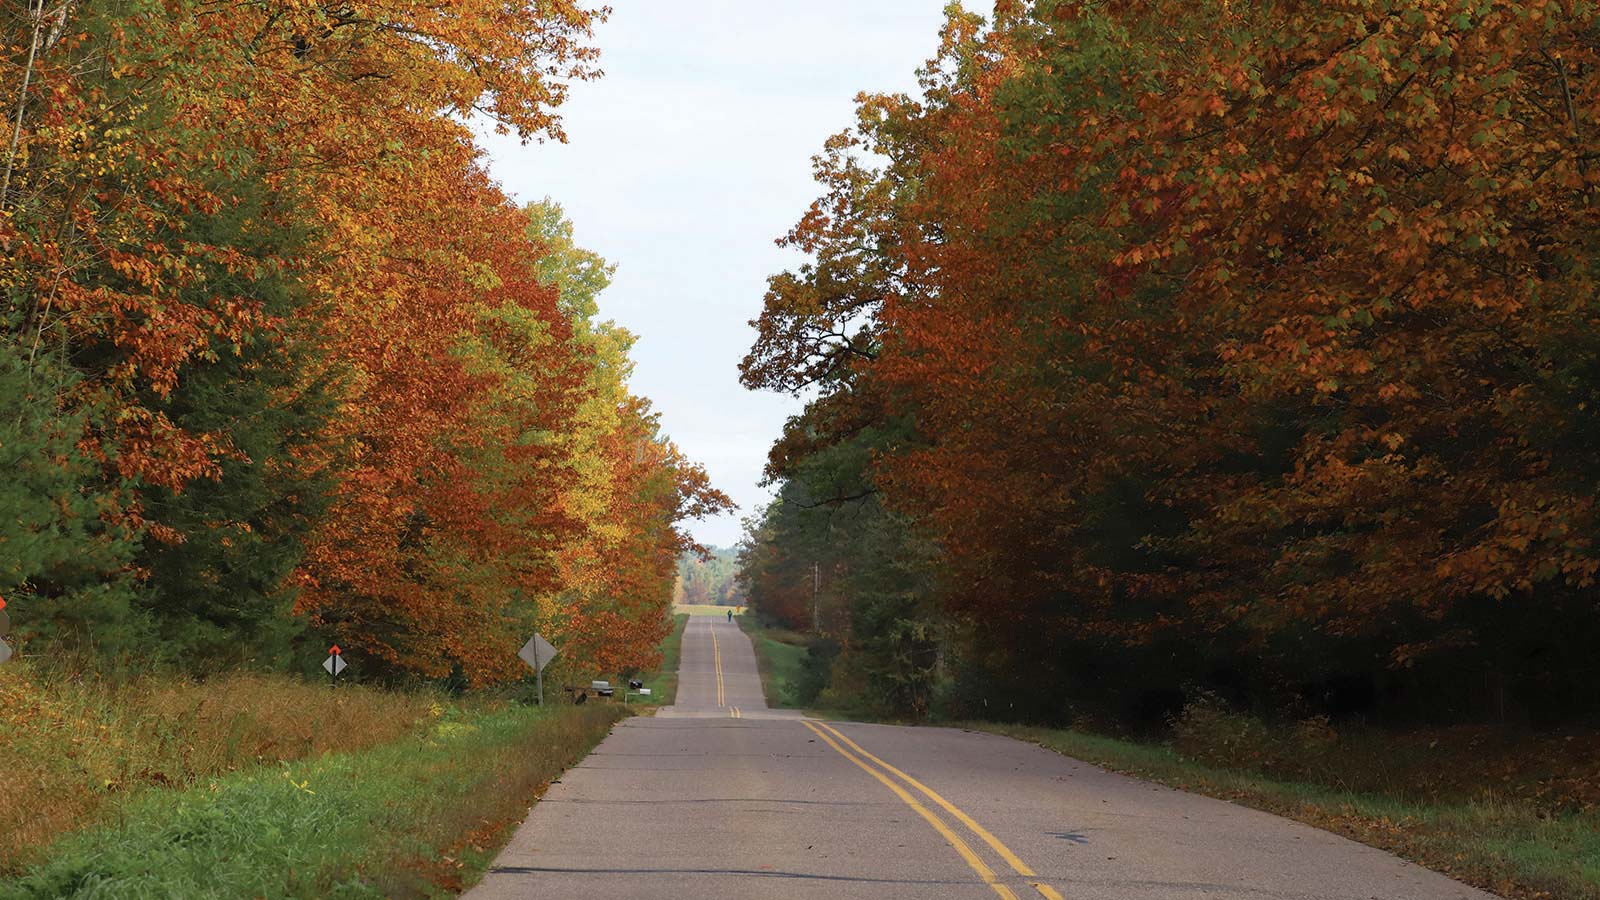 Scenic road with fall color trees on both sides